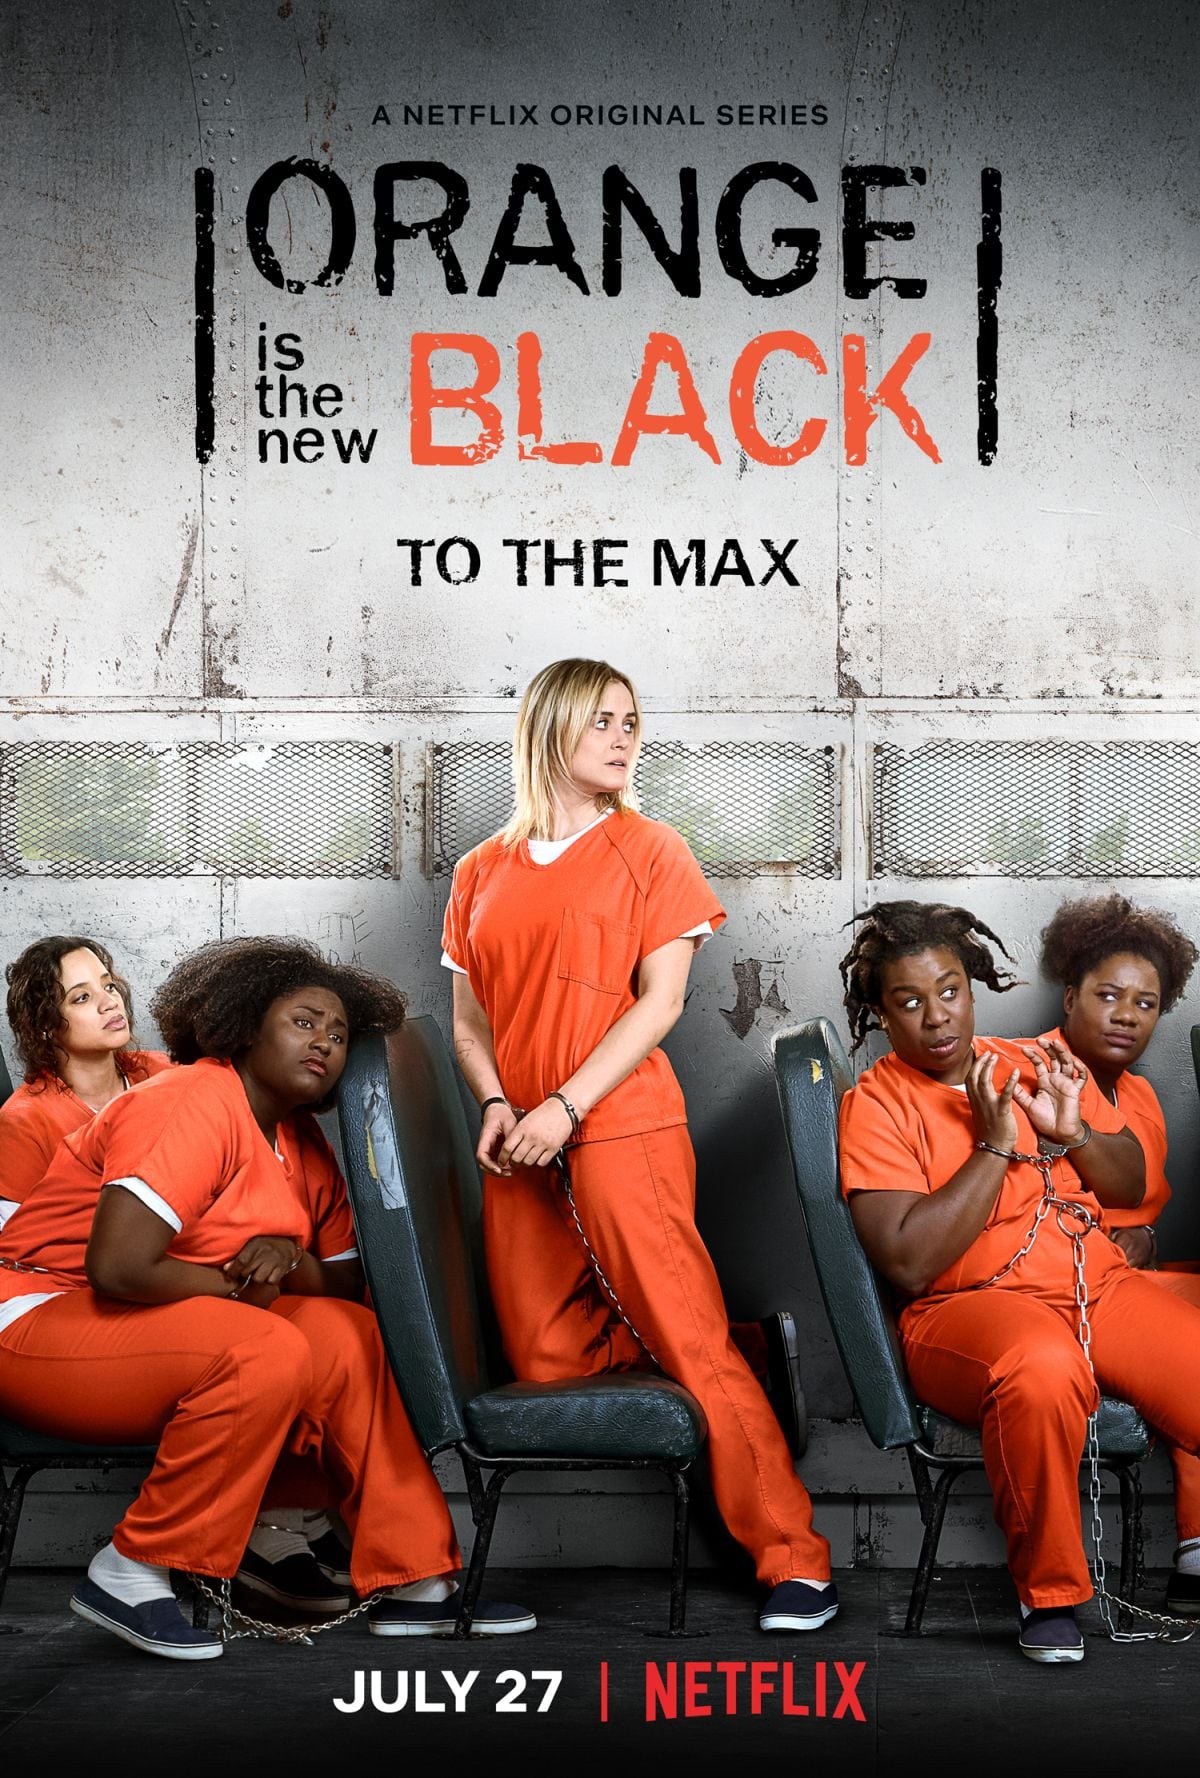 Orange Is The New Black Season 6 Gets A Poster And Trailer